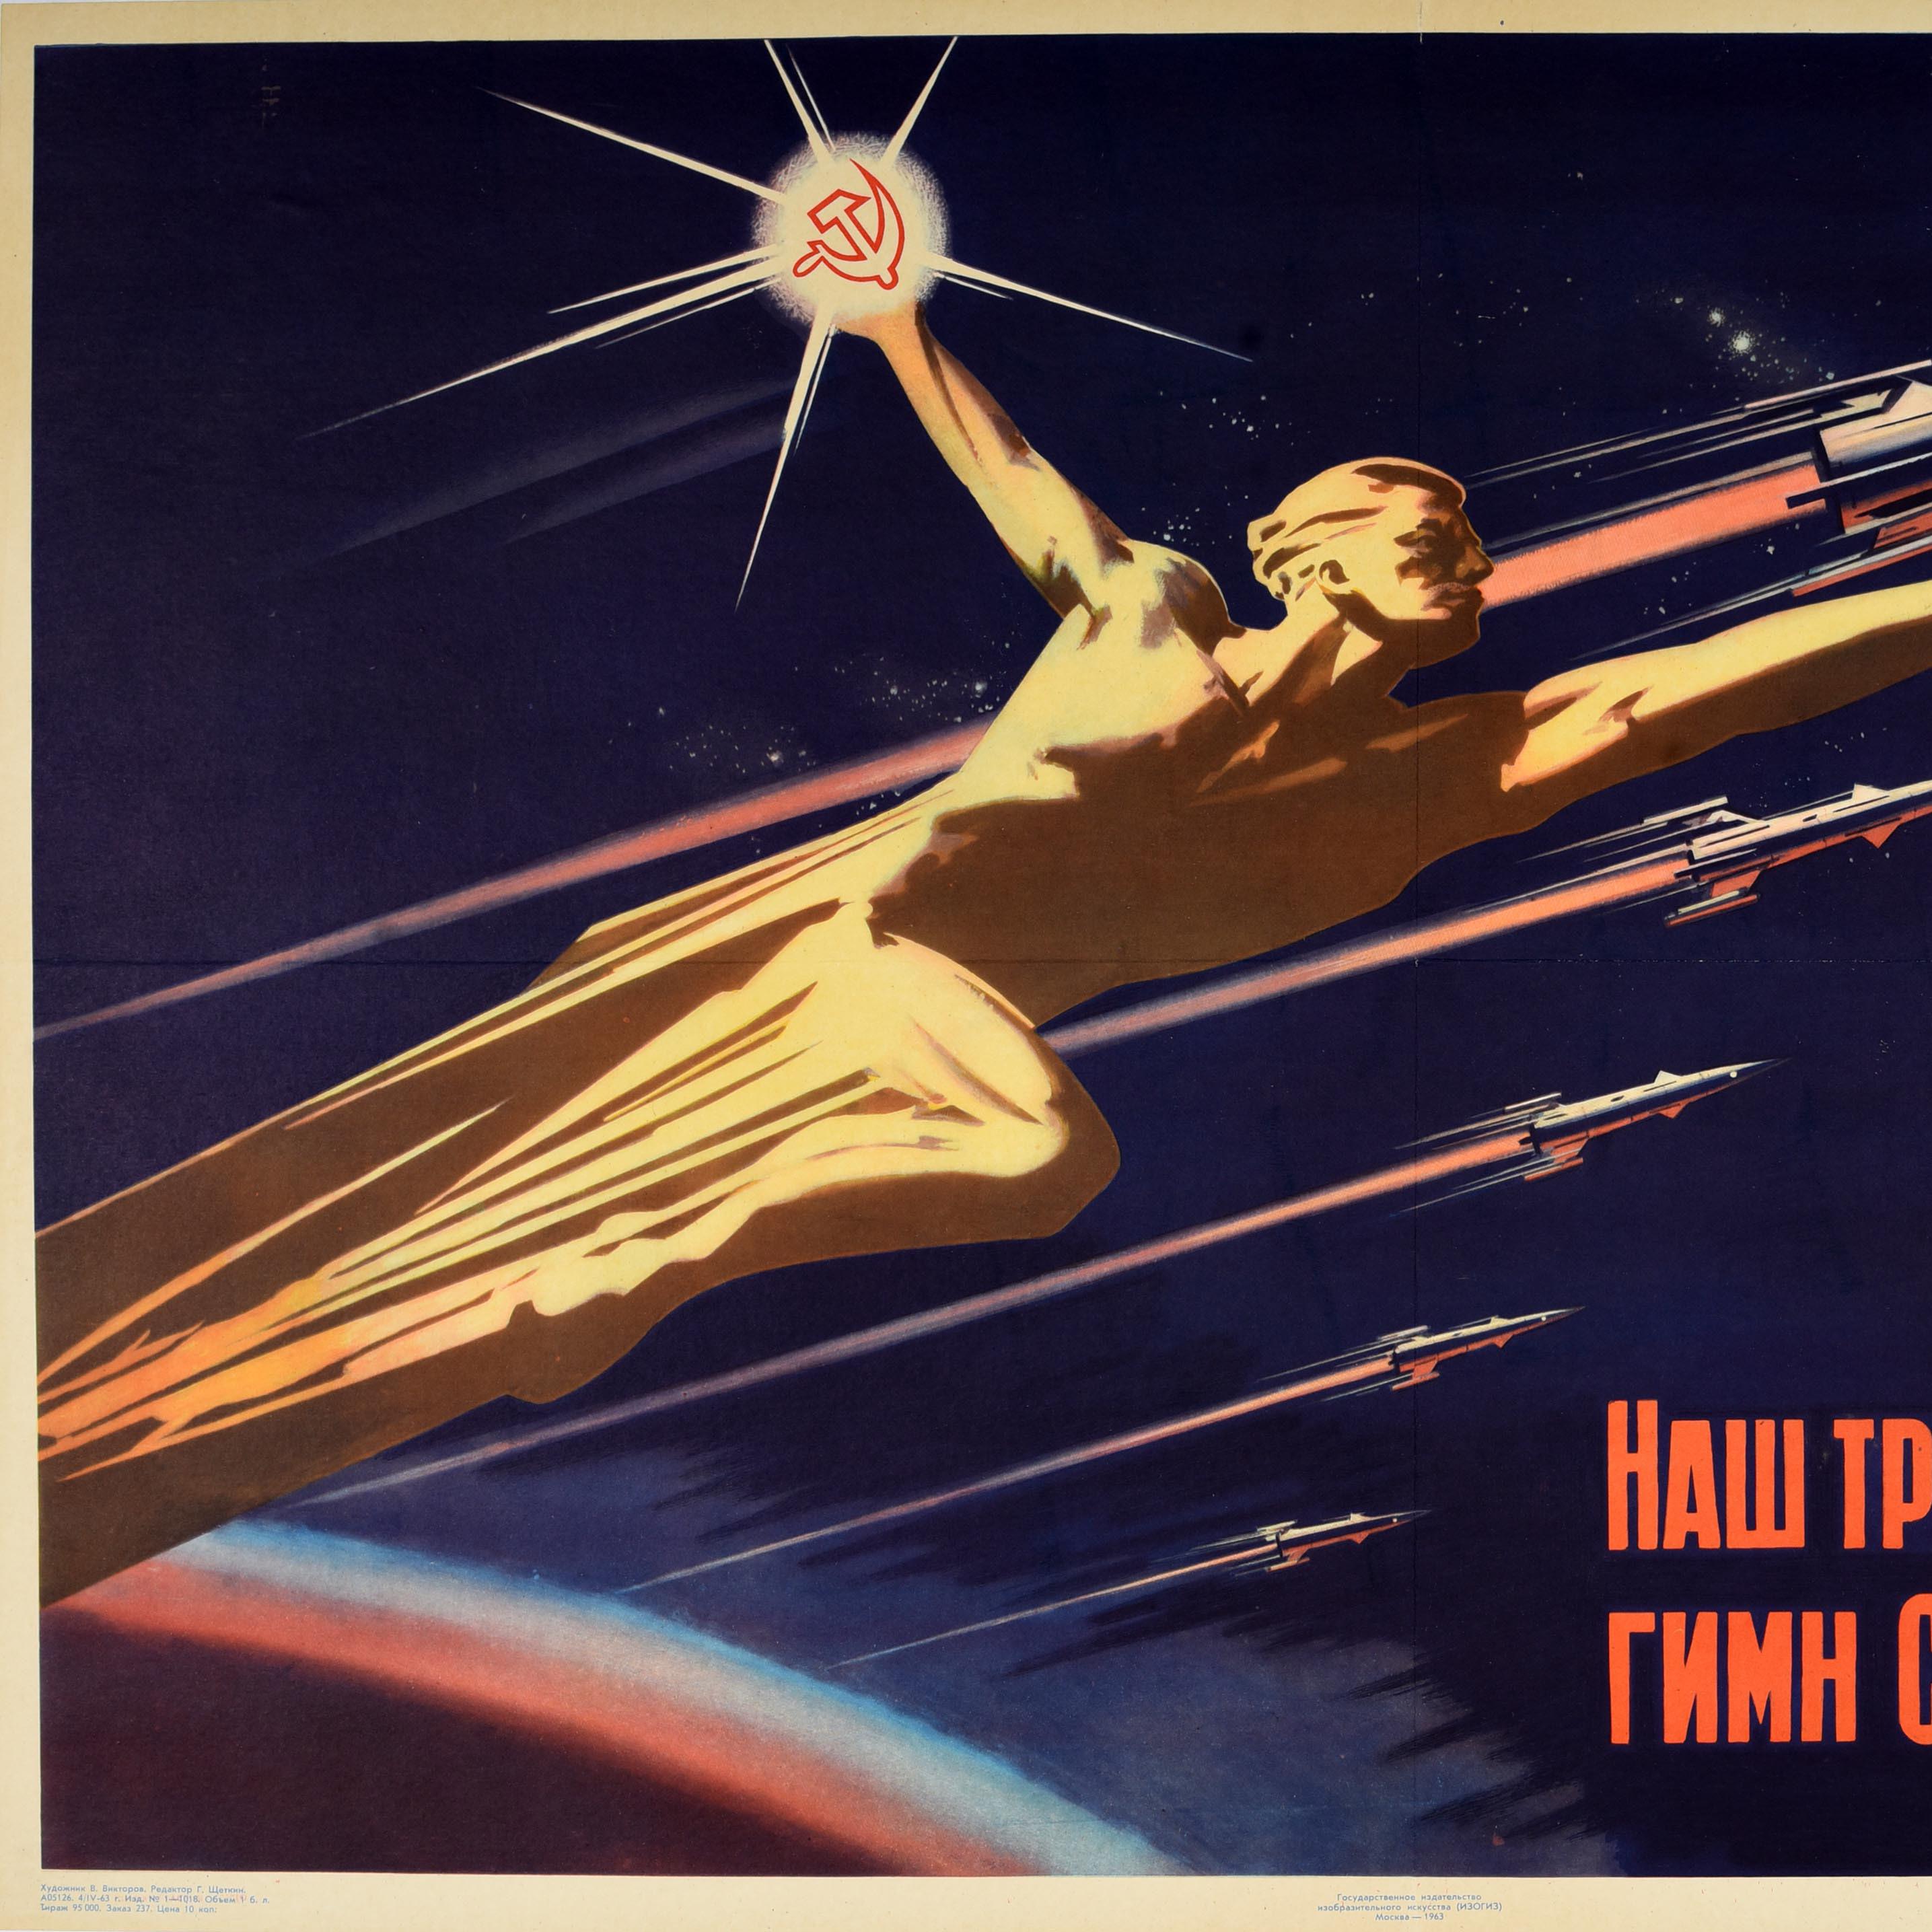 Original vintage USSR space race propaganda poster - Наш Триумф В Космосе Гимн Стране Советов! Our Triumph in Space Anthem to the Land of the Soviets - featuring a dynamic design depicting a man holding a hammer and sickle symbol in one hand with